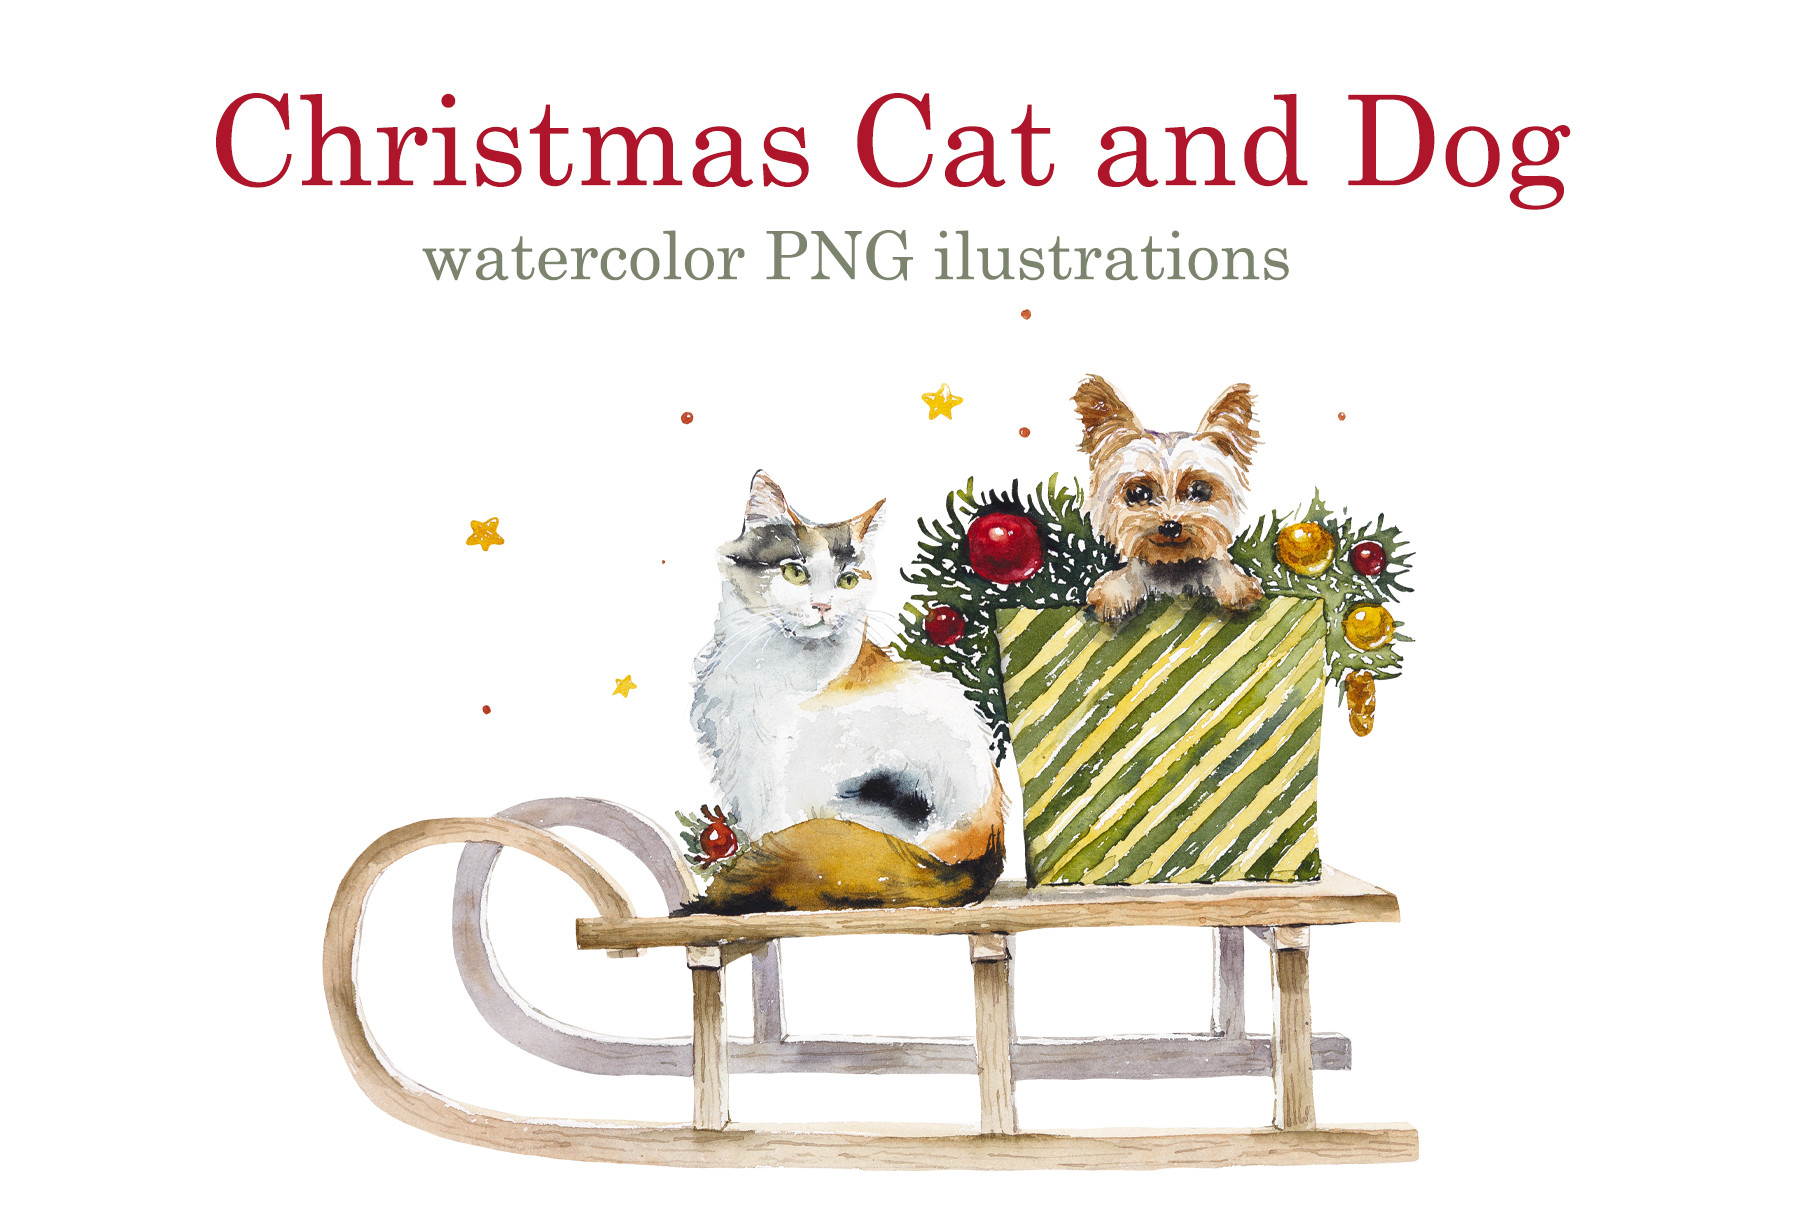 Watercolor Christmas puppy dog with gift boxes clipart-3 png